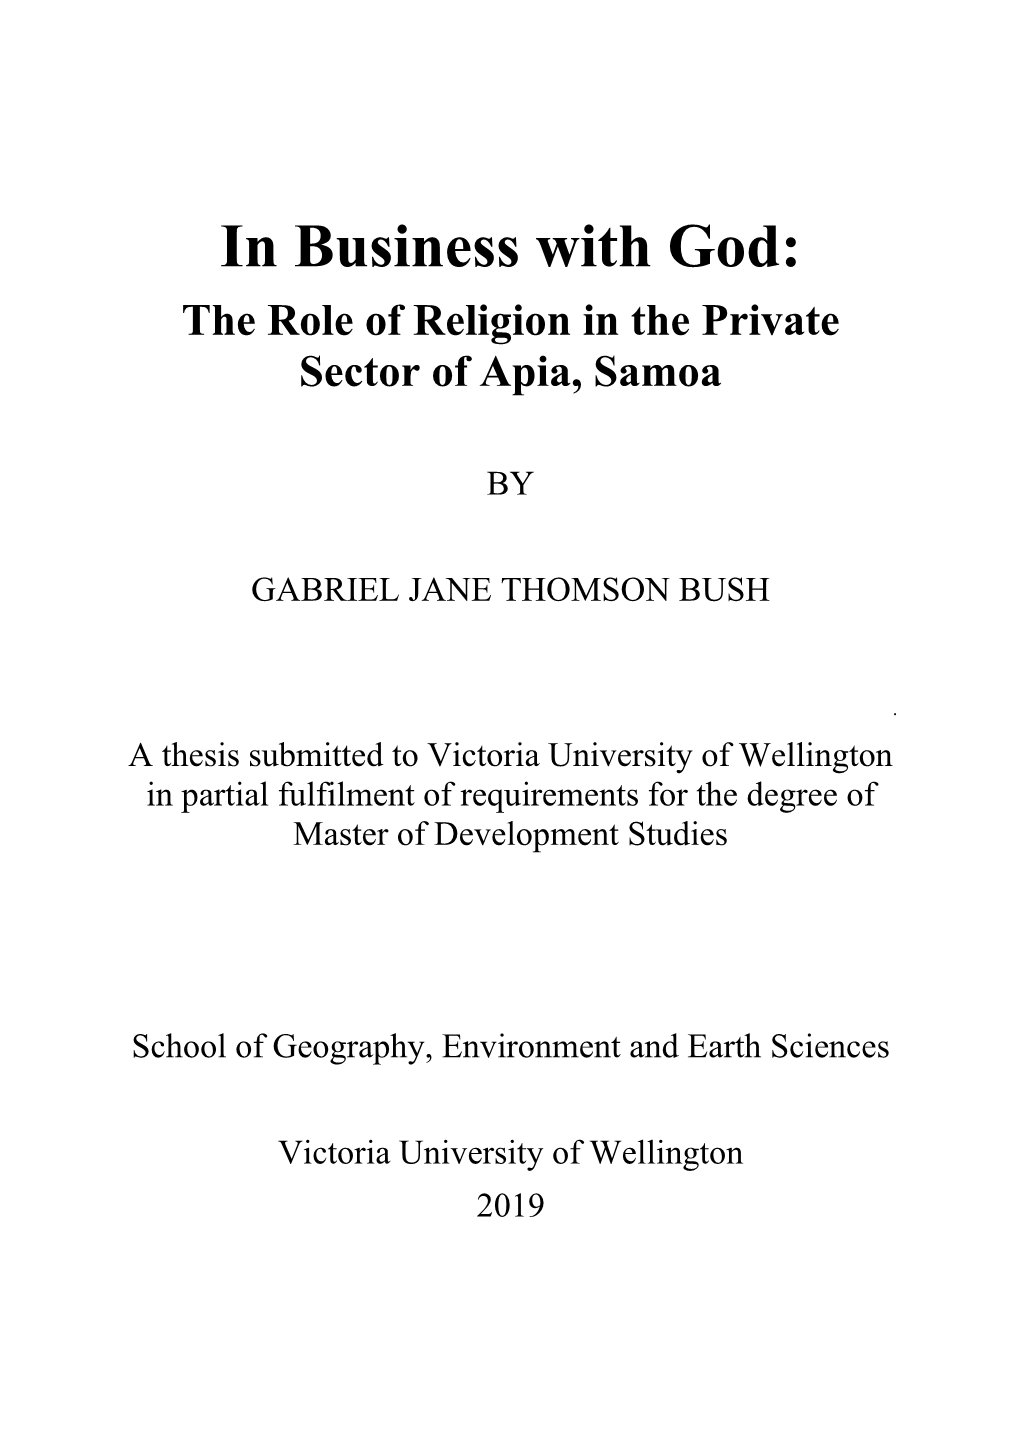 In Business with God: the Role of Religion in the Private Sector of Apia, Samoa